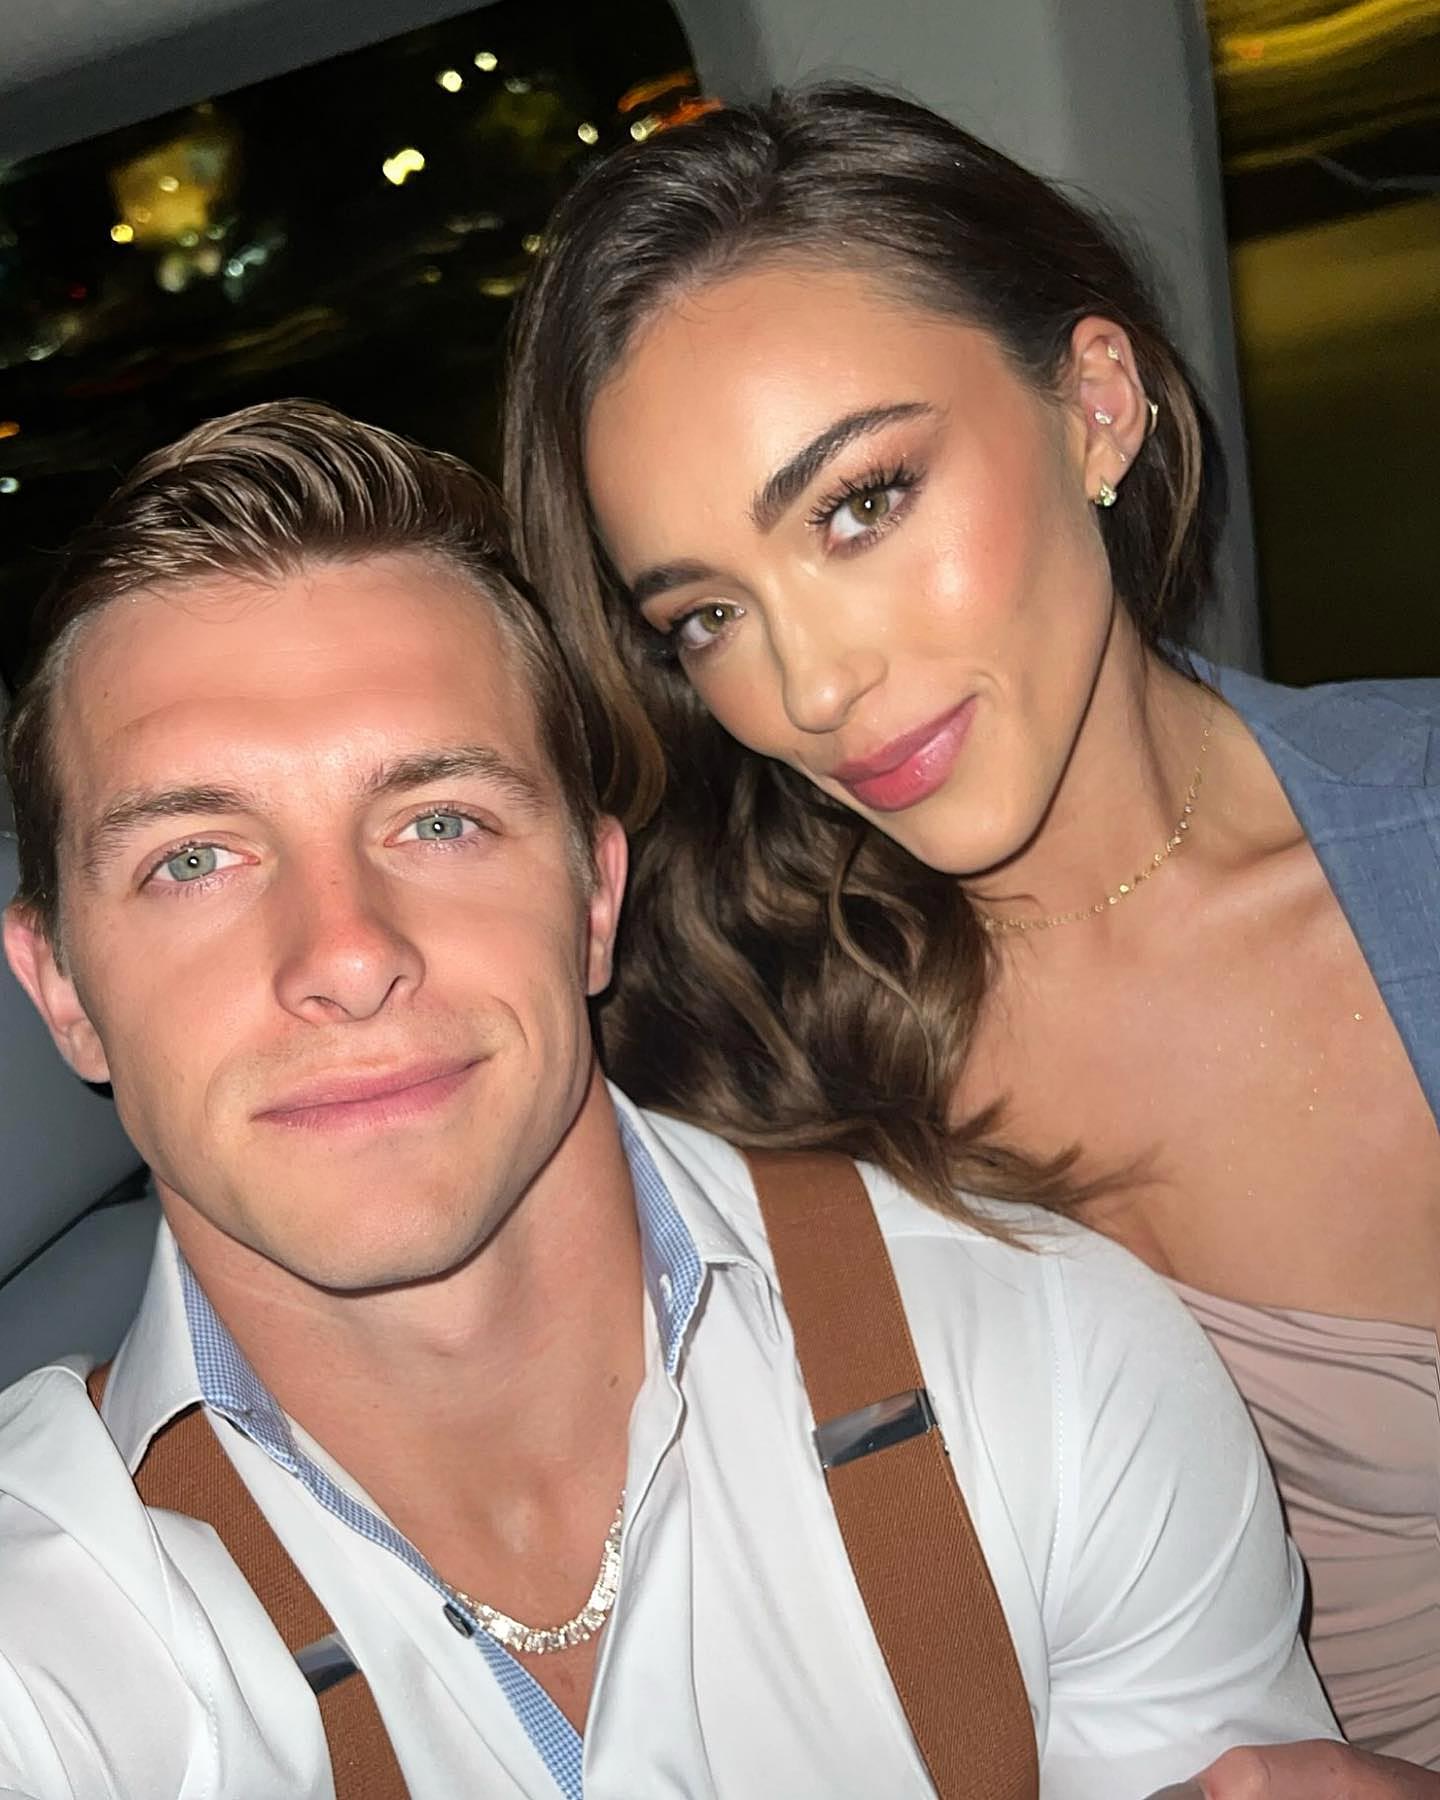 Sophia Culpo Claims Ex Braxton Berrios Cheated, Lied About Split pic